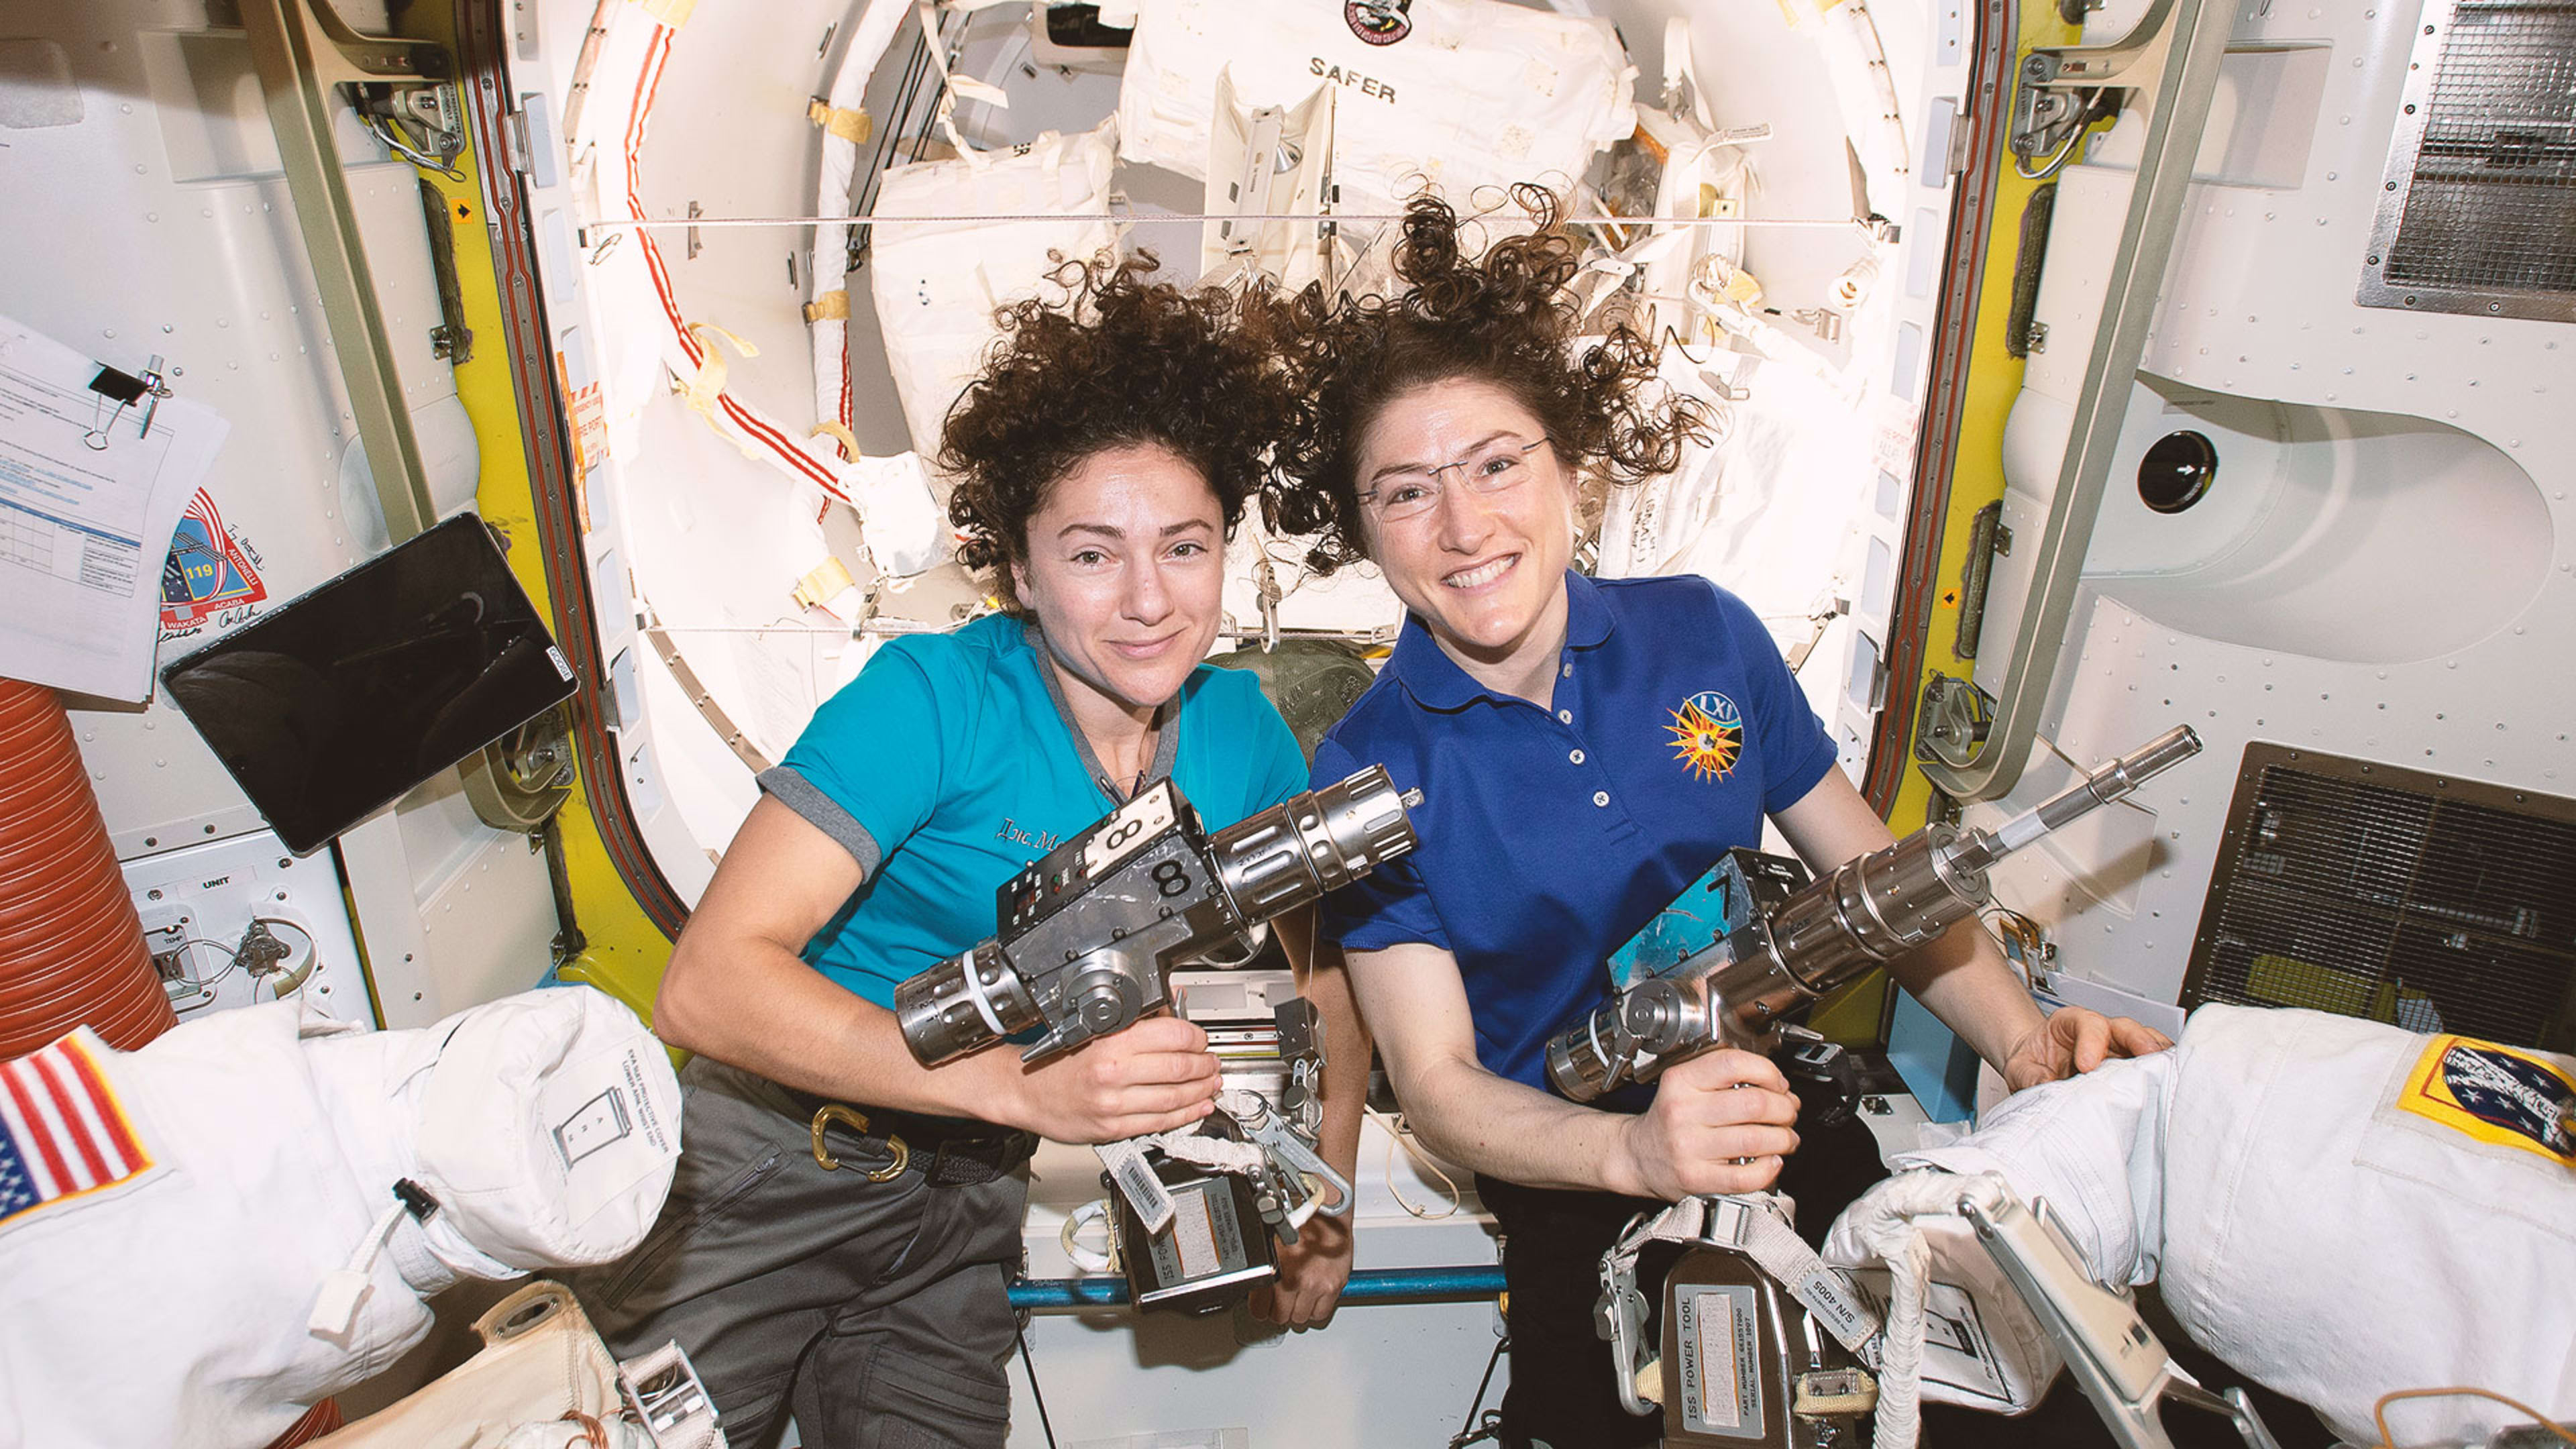 Set your alarm so you can watch NASA’s first all-female spacewalk on Friday morning